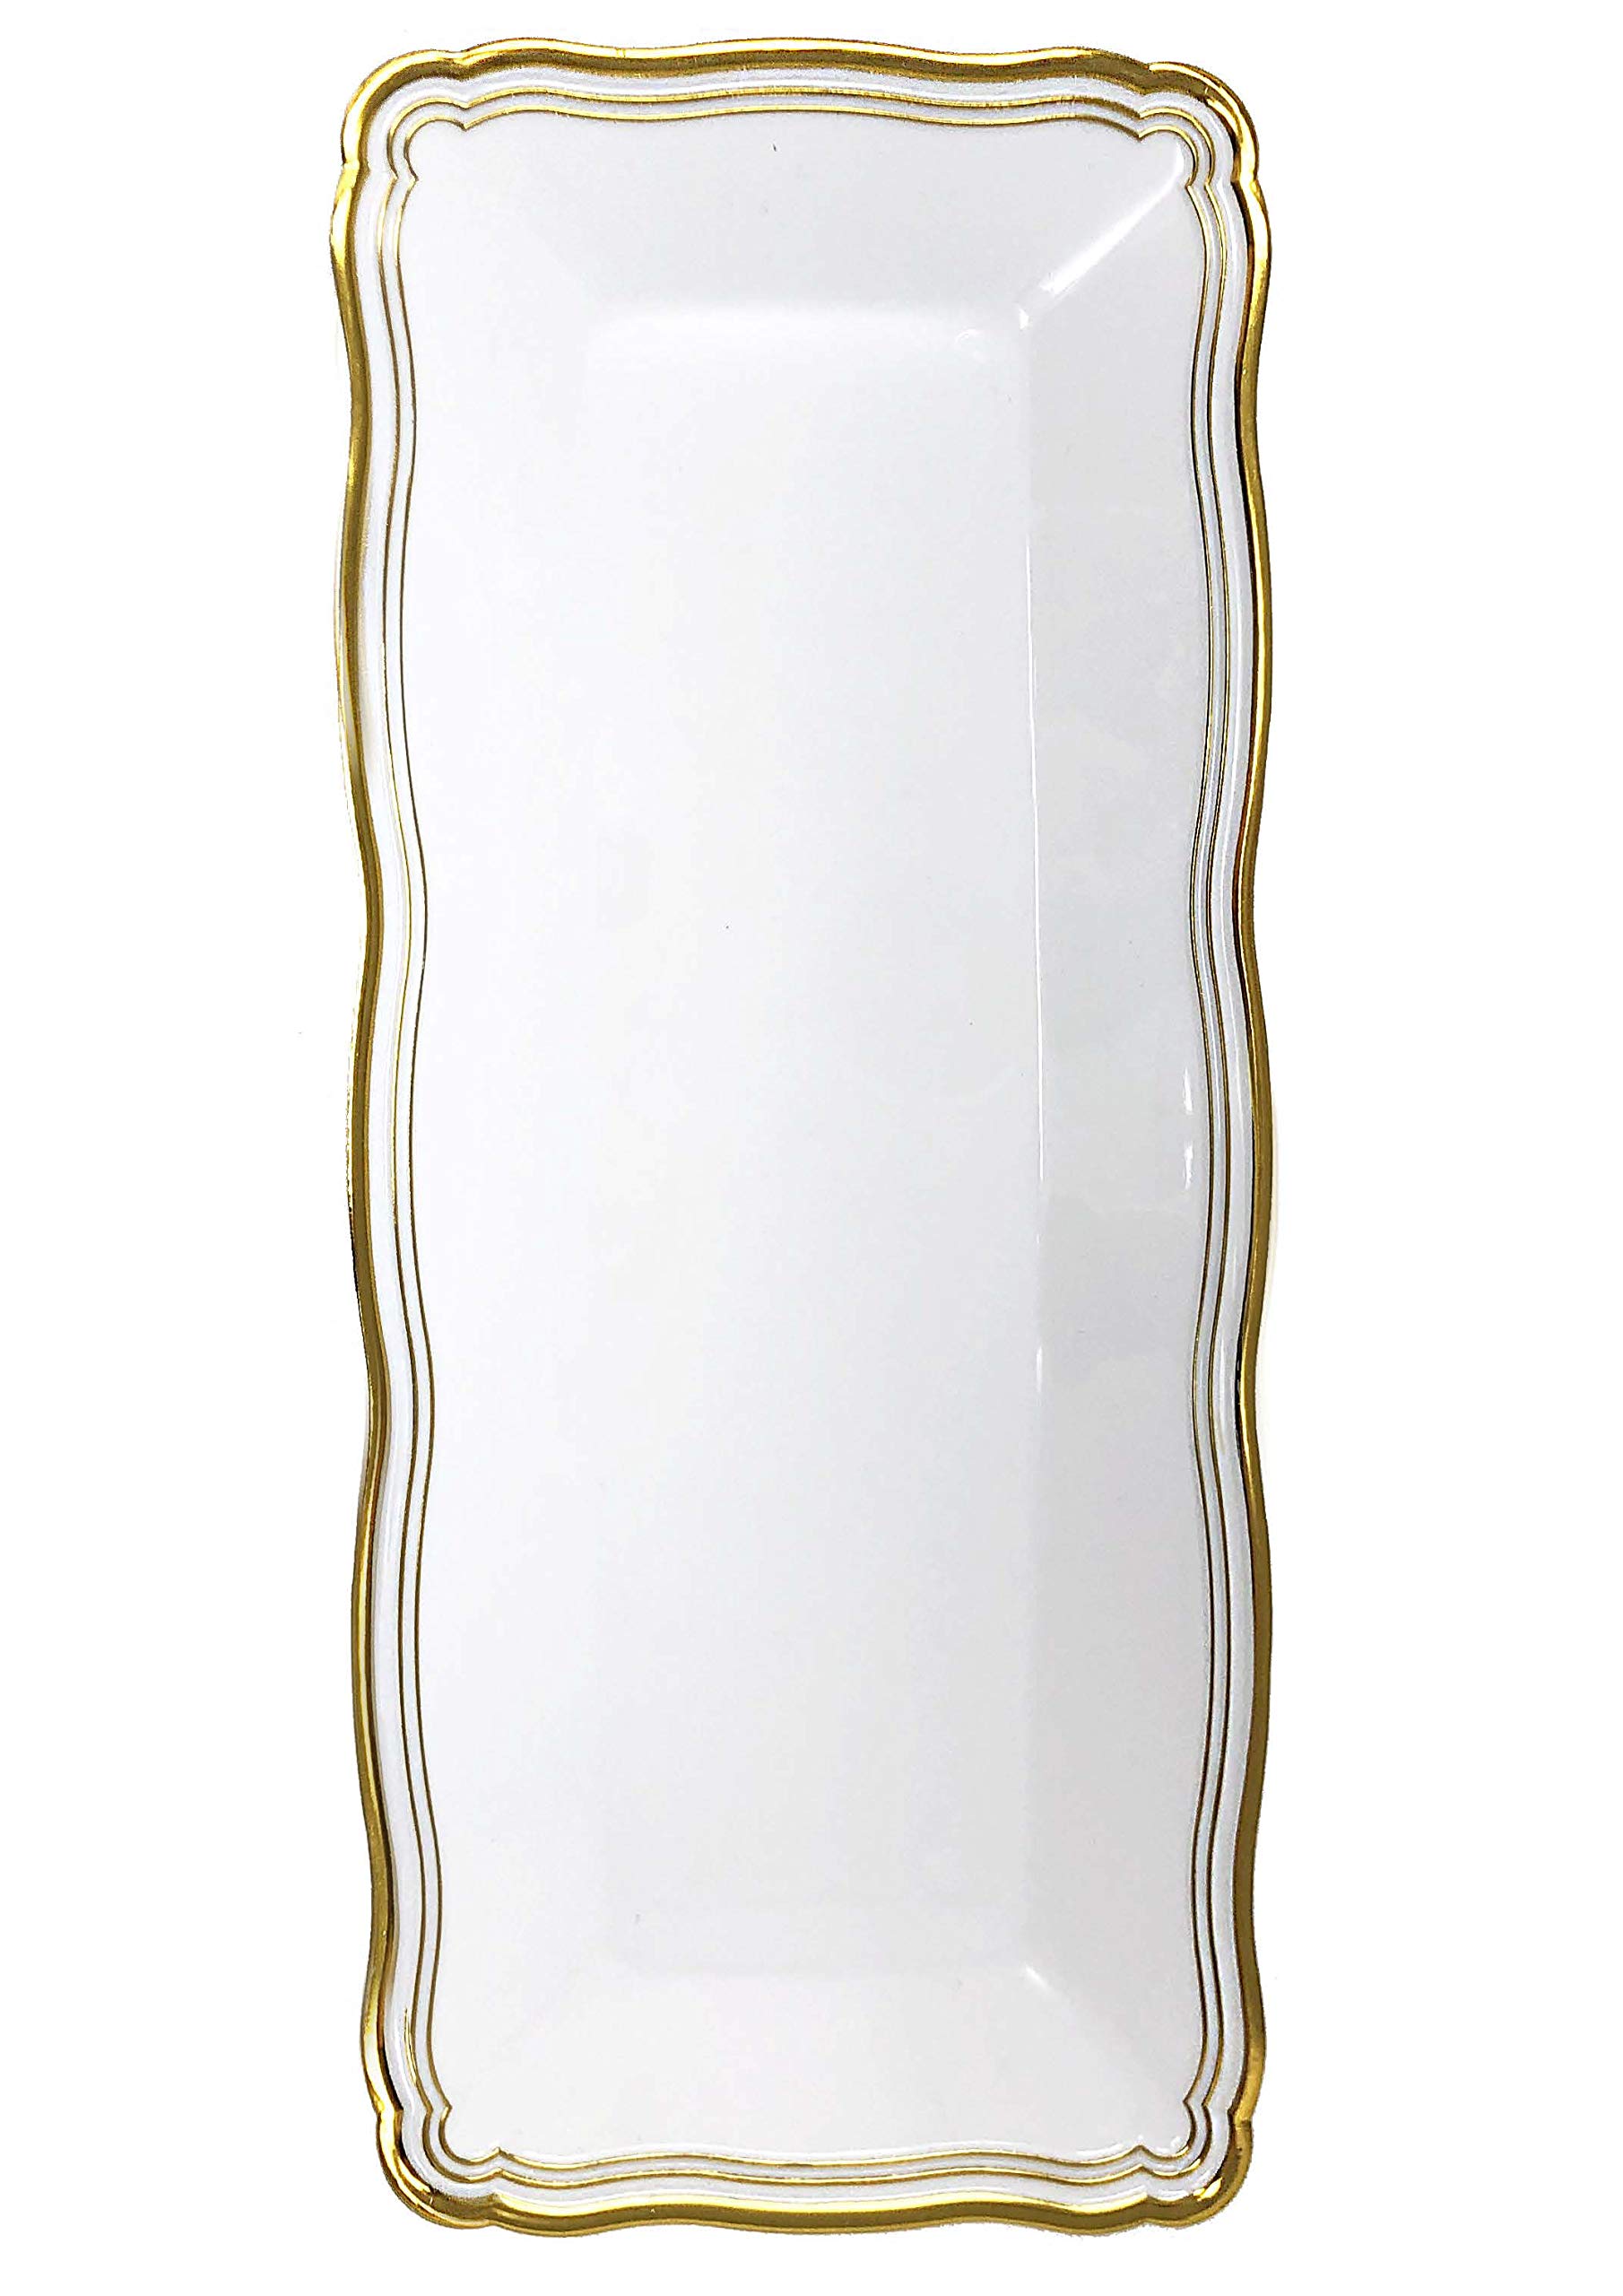 Elegant Aristocrat Collection White/Gold Serving Trays - 13.75” x 6” (Pack of 2) - Chic Luxury Design - Ideal for Any Occasion & Event